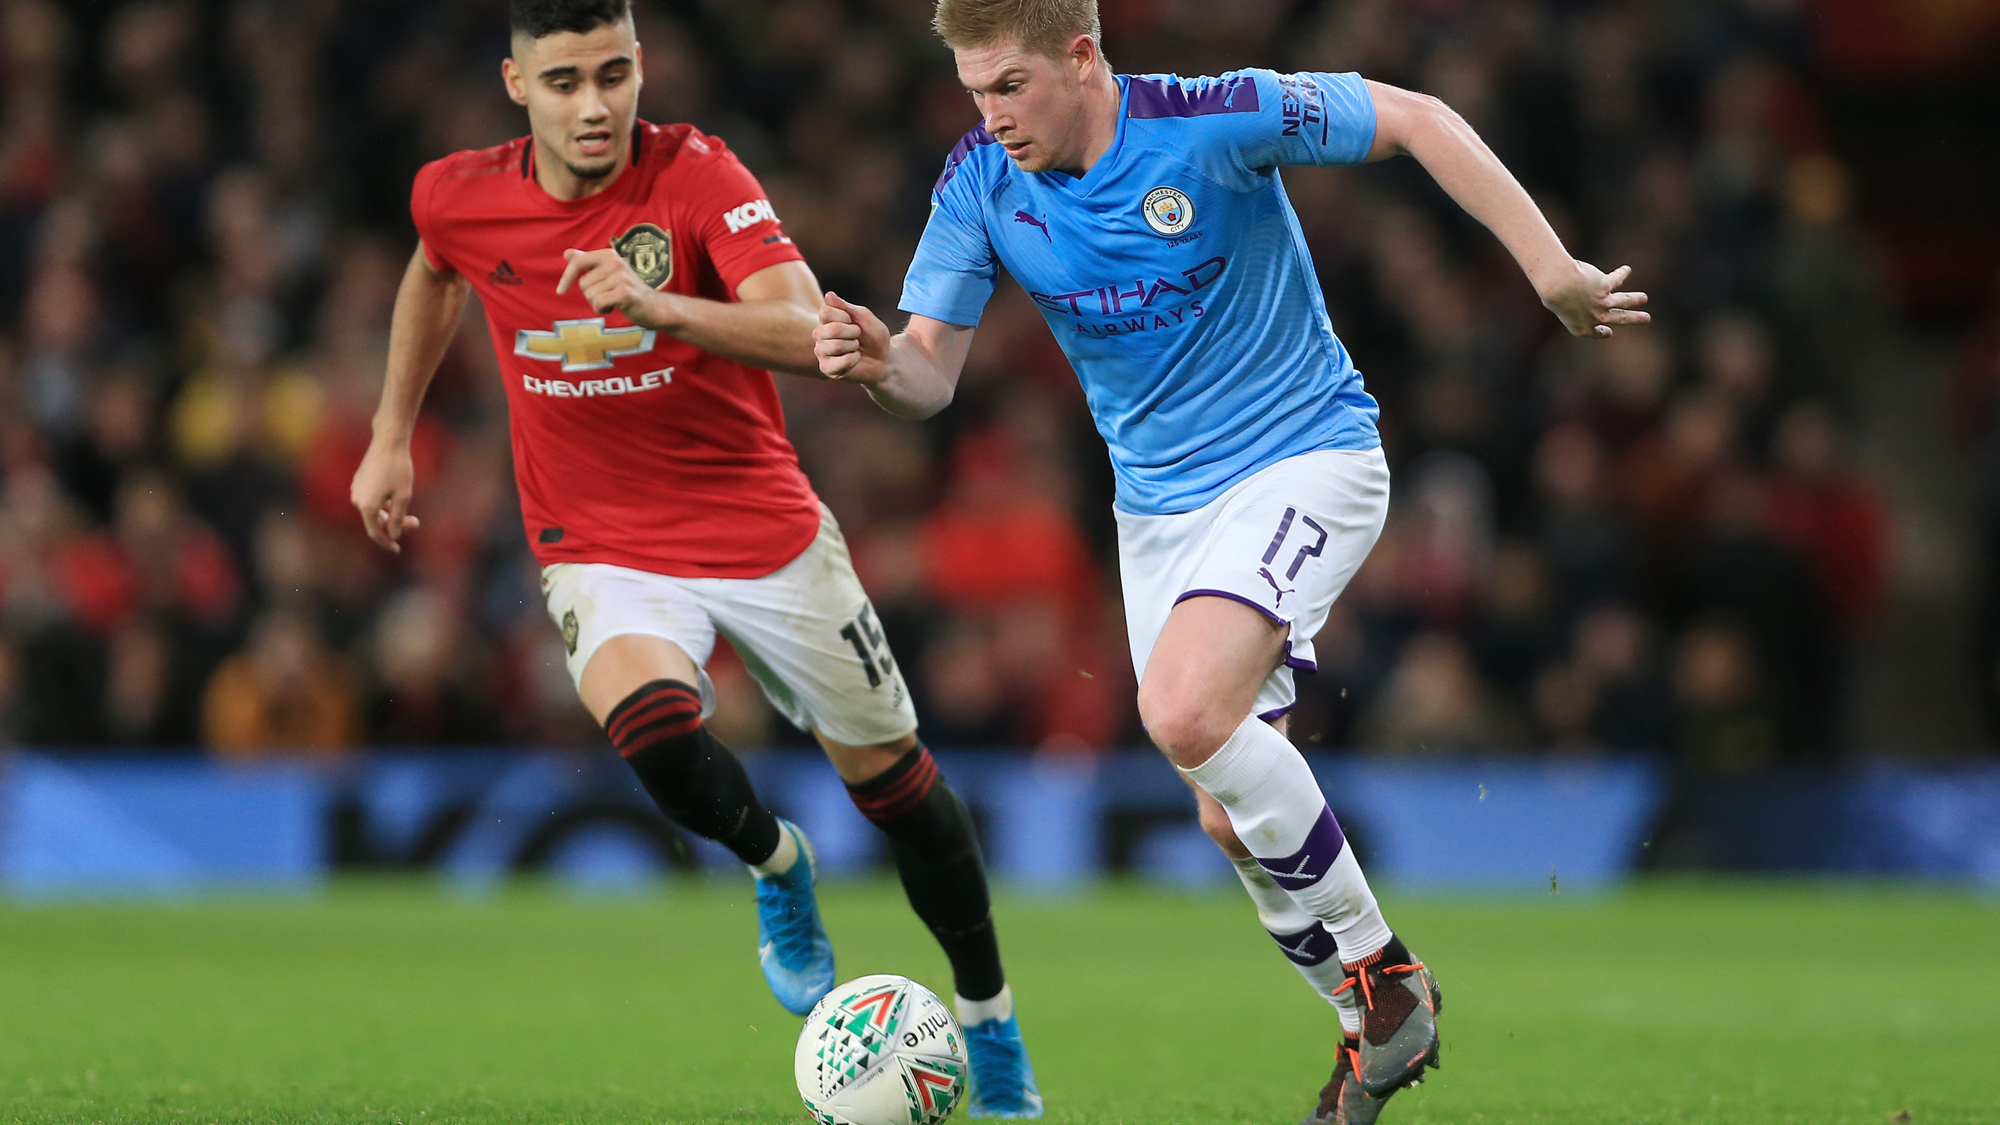 Man City vs Man United live stream: How to watch | Tom's Guide